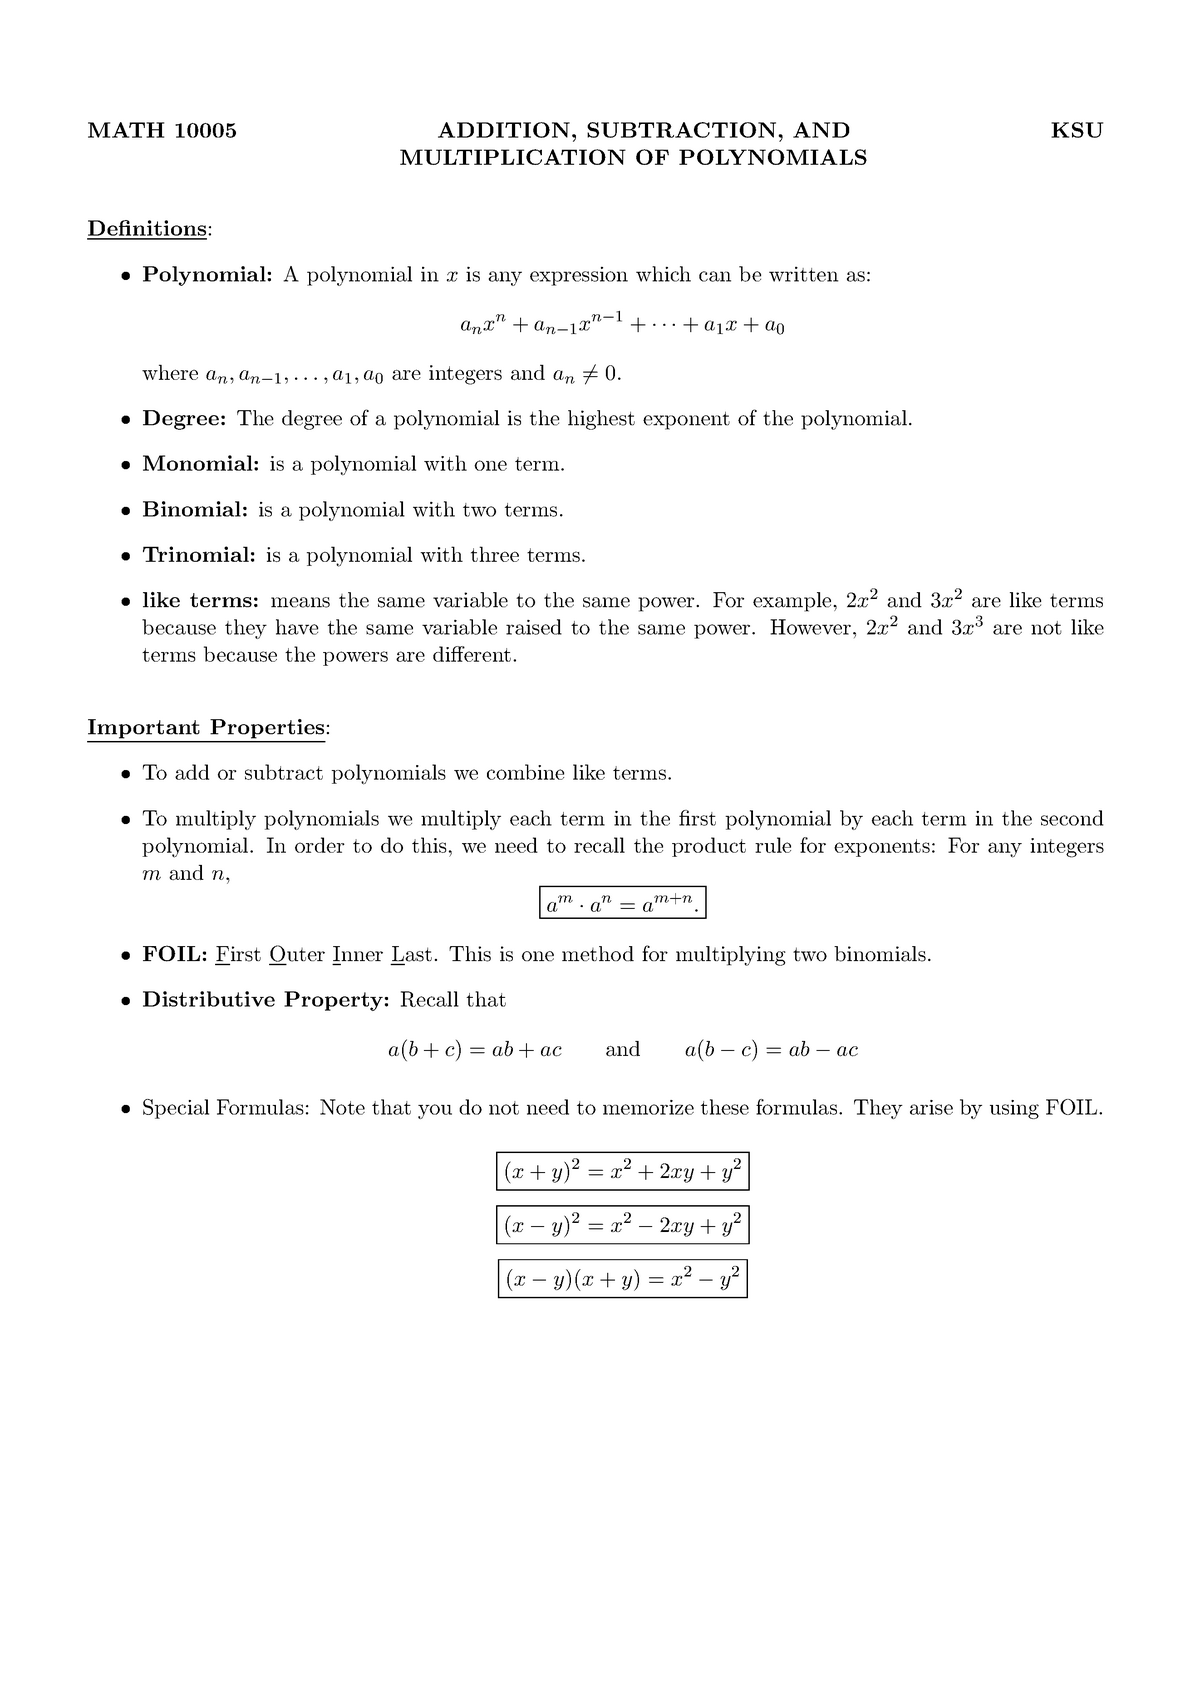 addition-subtraction-and-multiplication-of-polynomials-math-10005-addition-subtraction-and